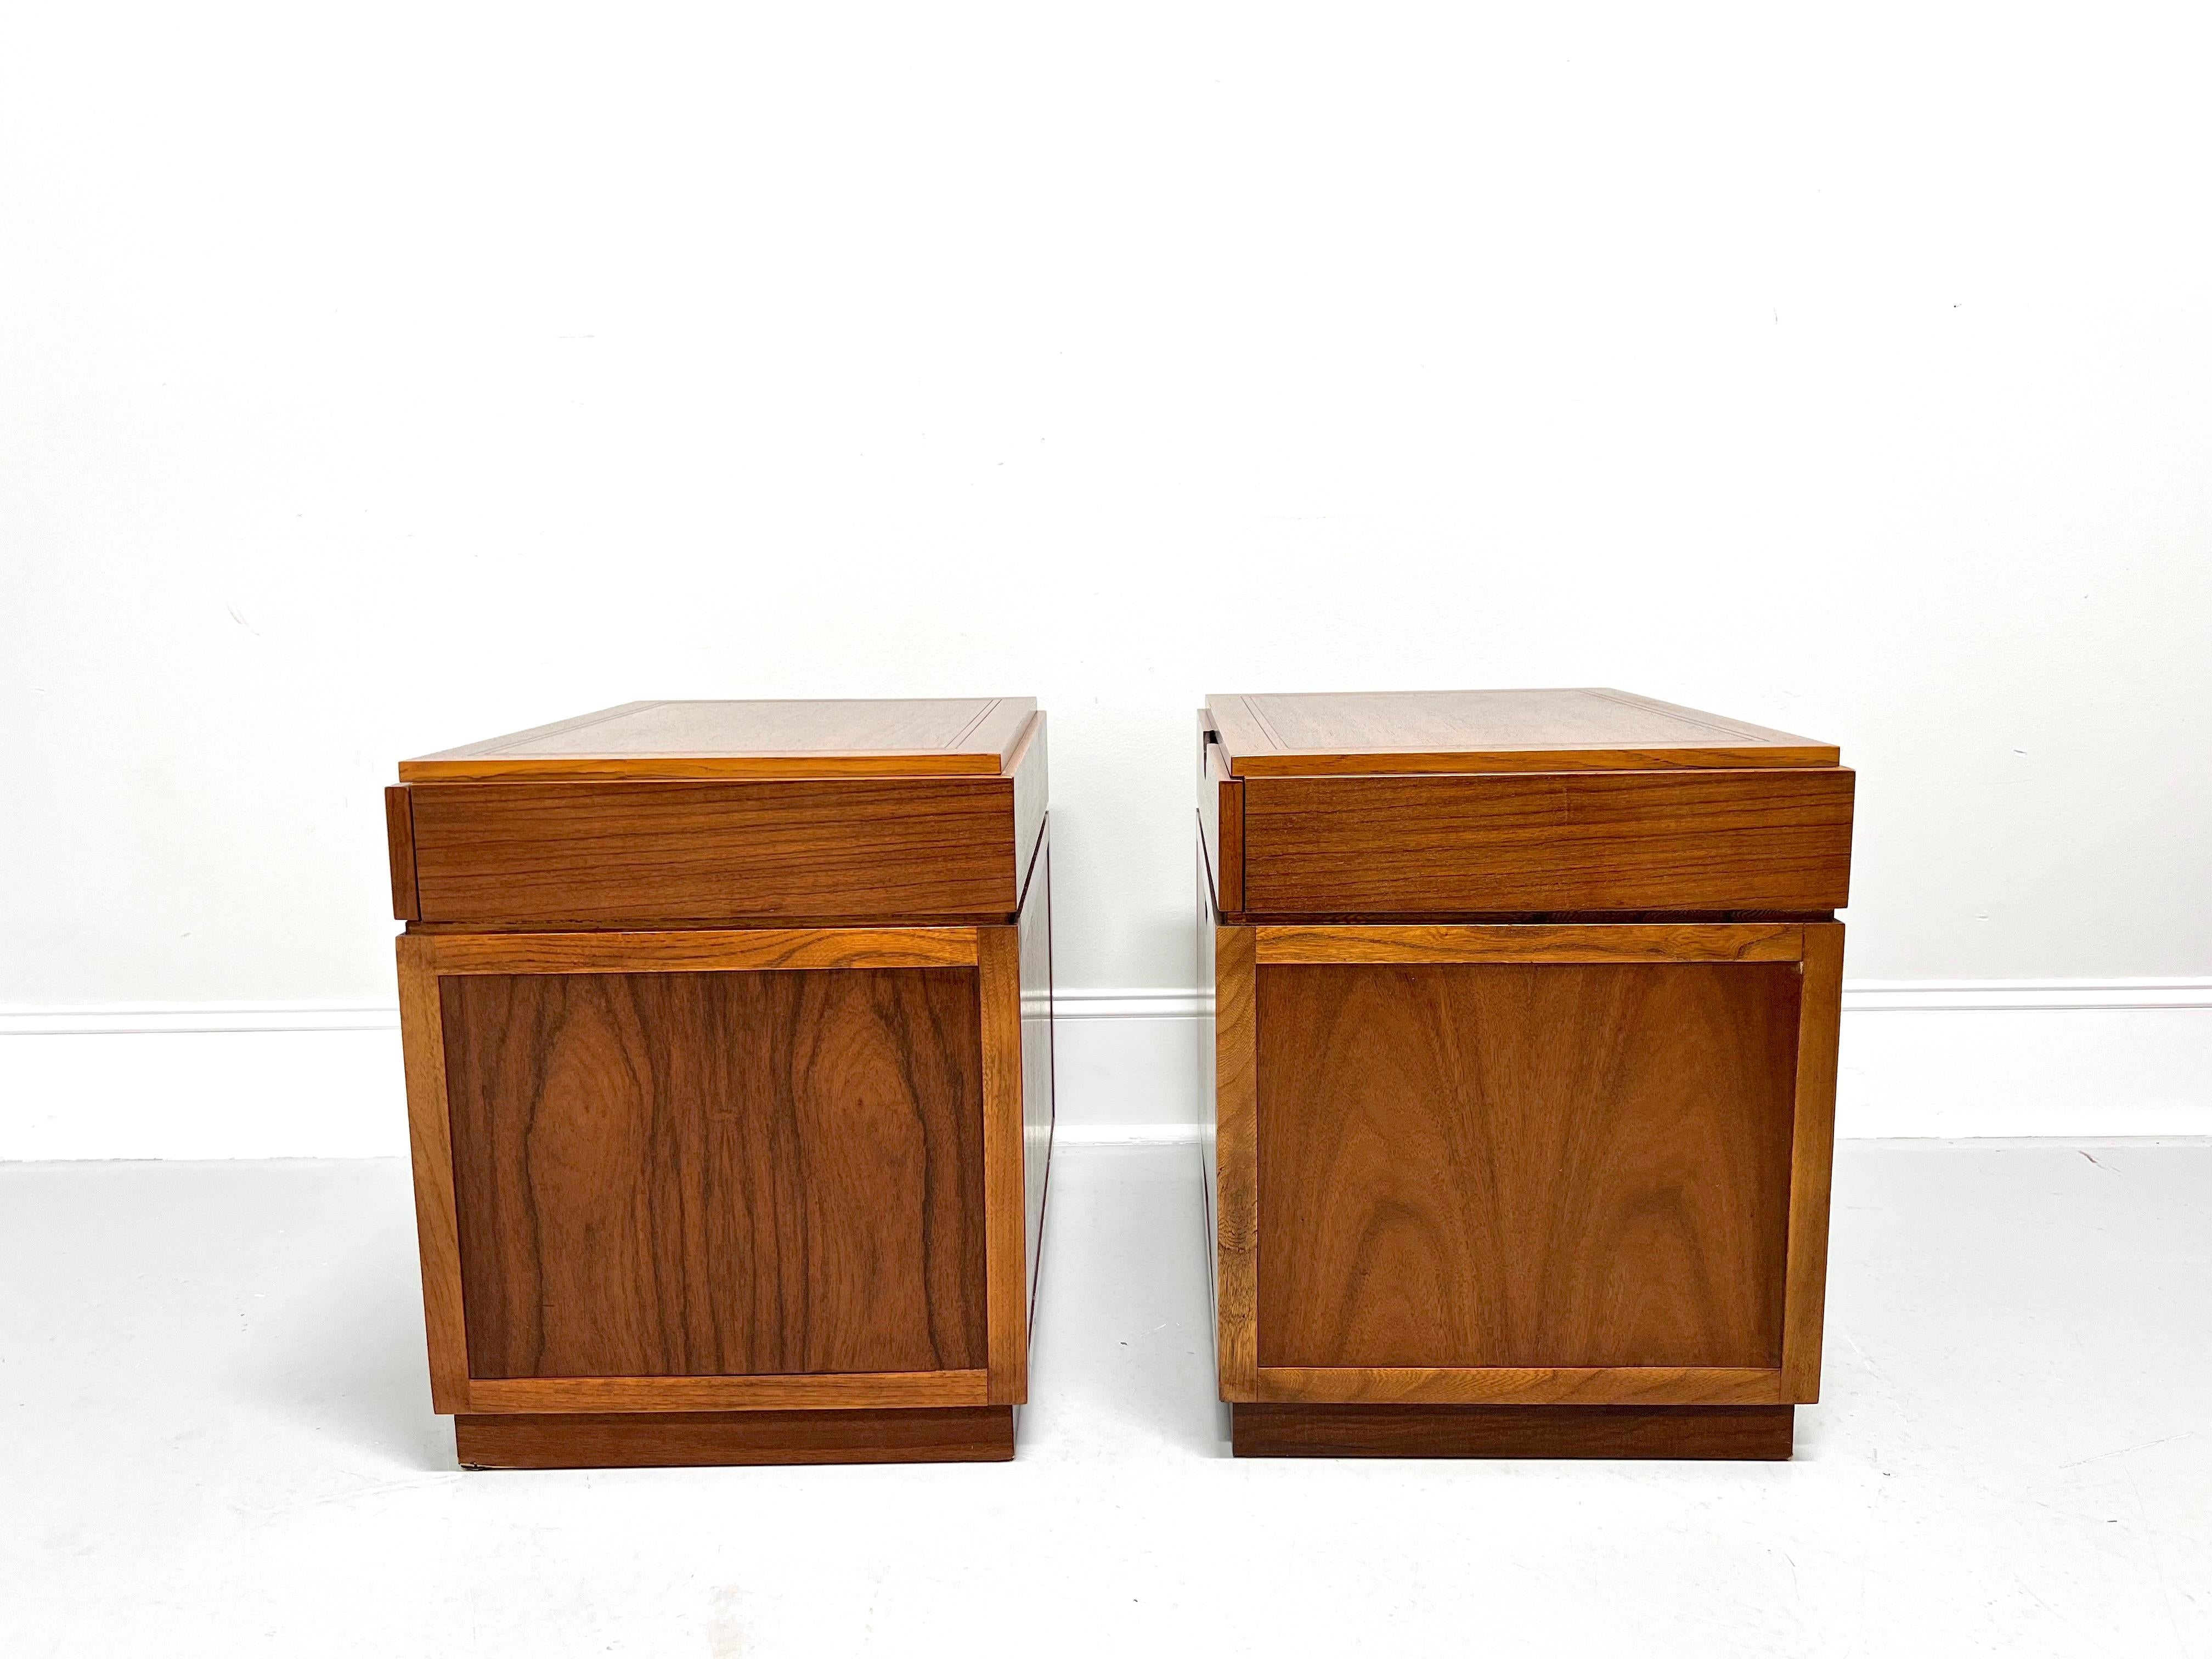 American BAKER Mid 20th Century Rosewood & Walnut Asian Inspired Nightstands - Pair For Sale